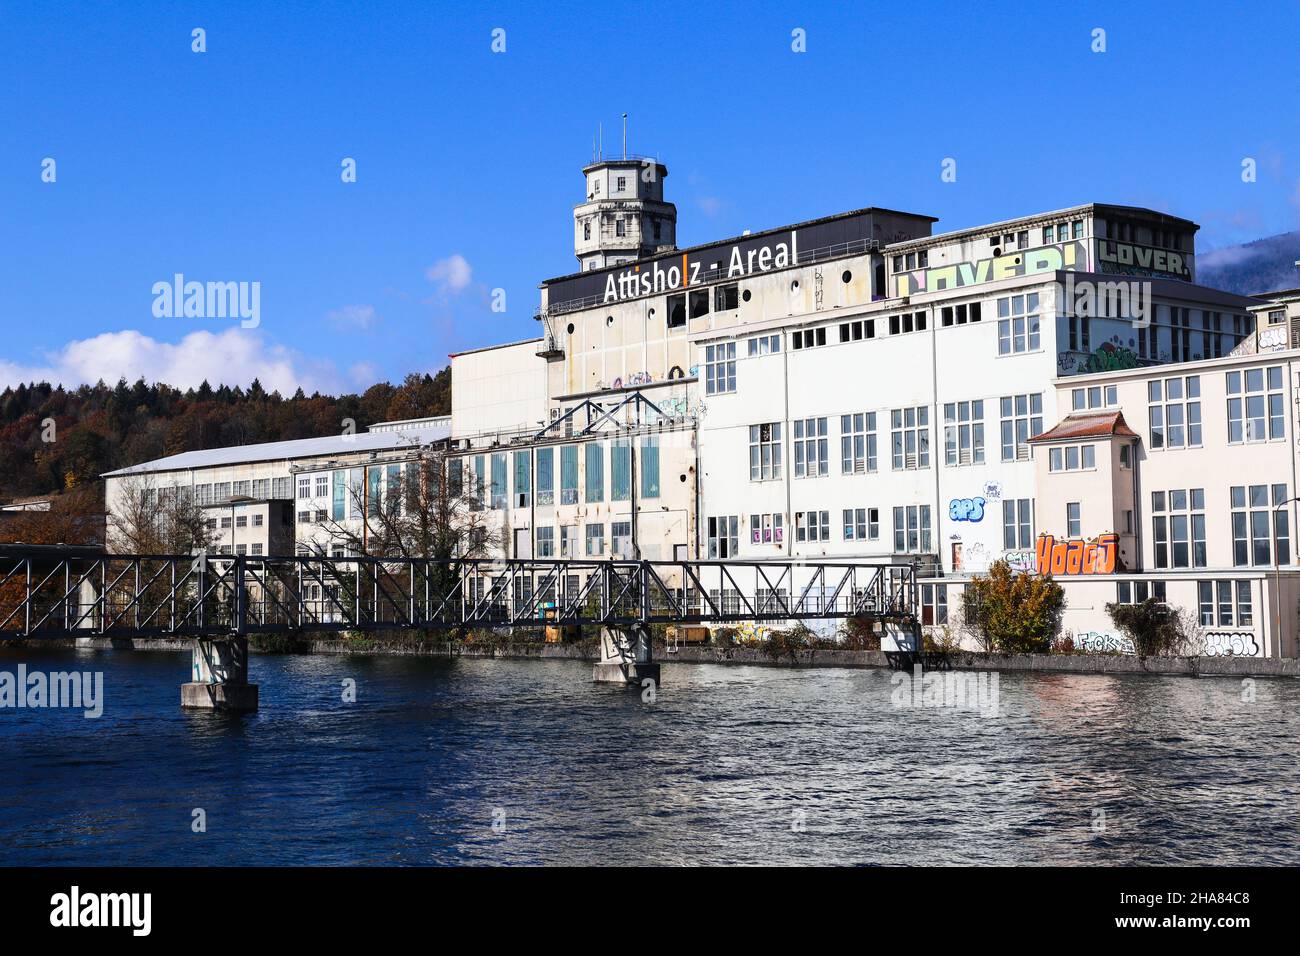 Abandoned Industry Area in Switzerland called Attisholz with the Aare River Stock Photo